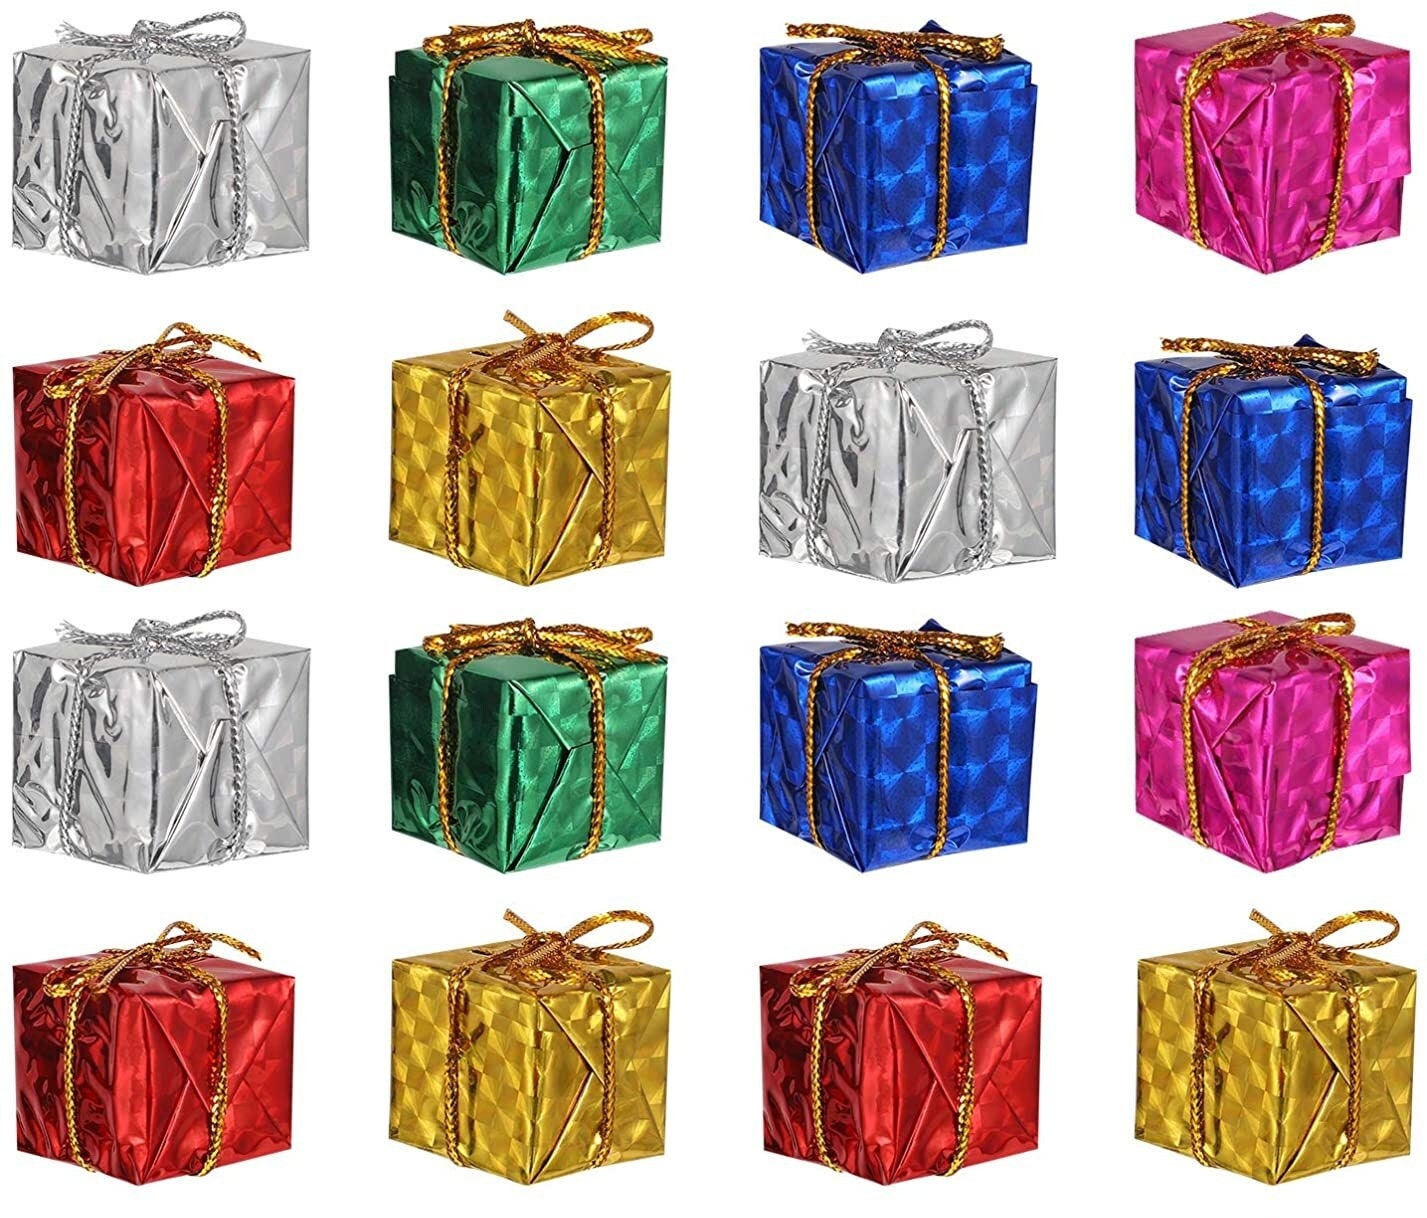 Mini Christmas Gifts - 20ct Mini Present Boxes for Christmas Villages, Dollhouses, Giftwrap, Trees, and Christmas Decor